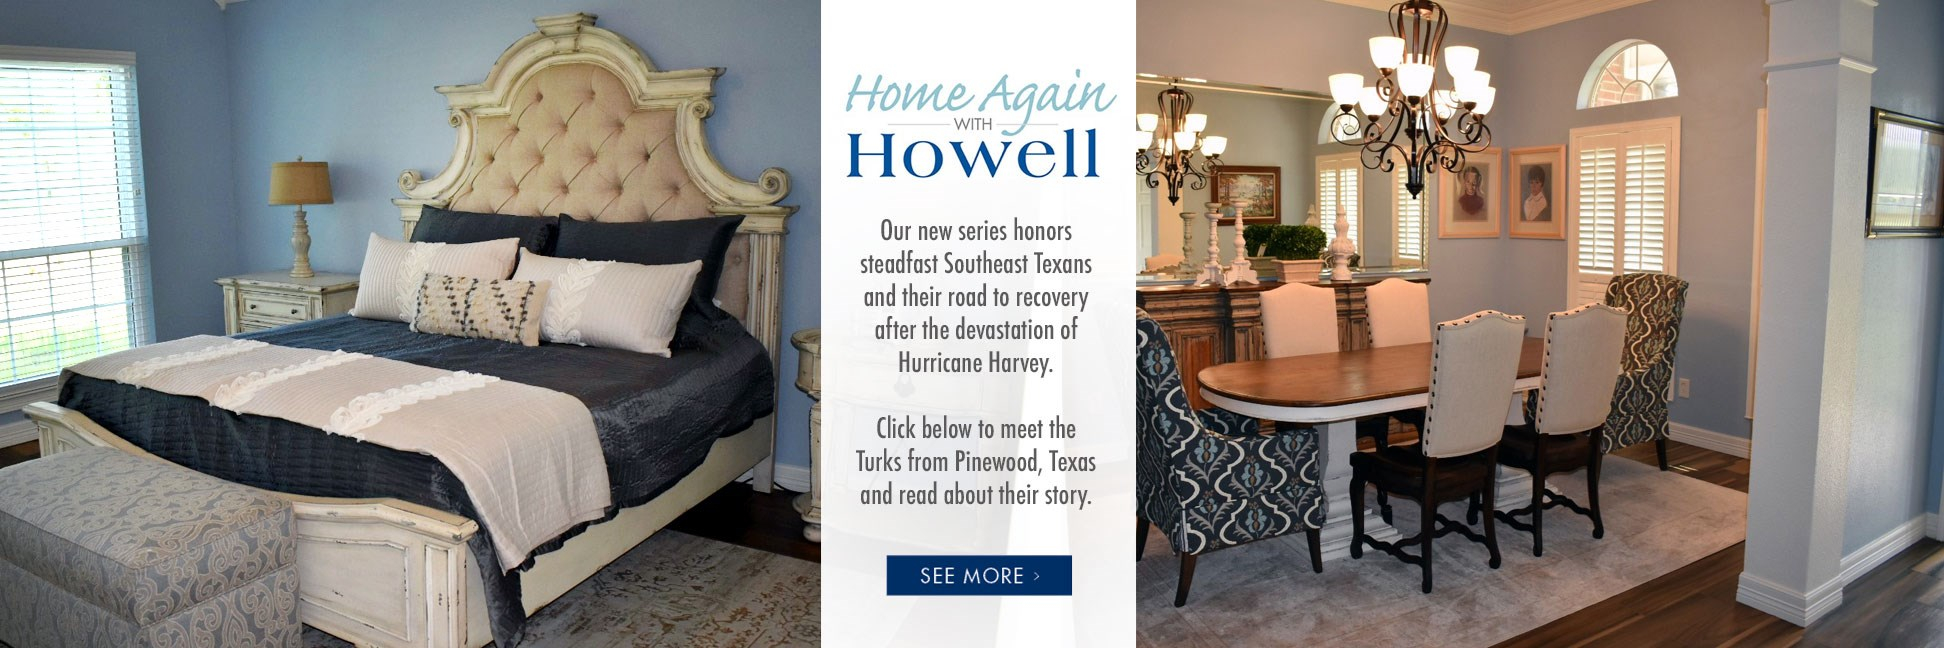 Howell Furniture | Beaumont, Port Arthur, Lake Charles pertaining to Mike'S Furniture Beaumont Tx